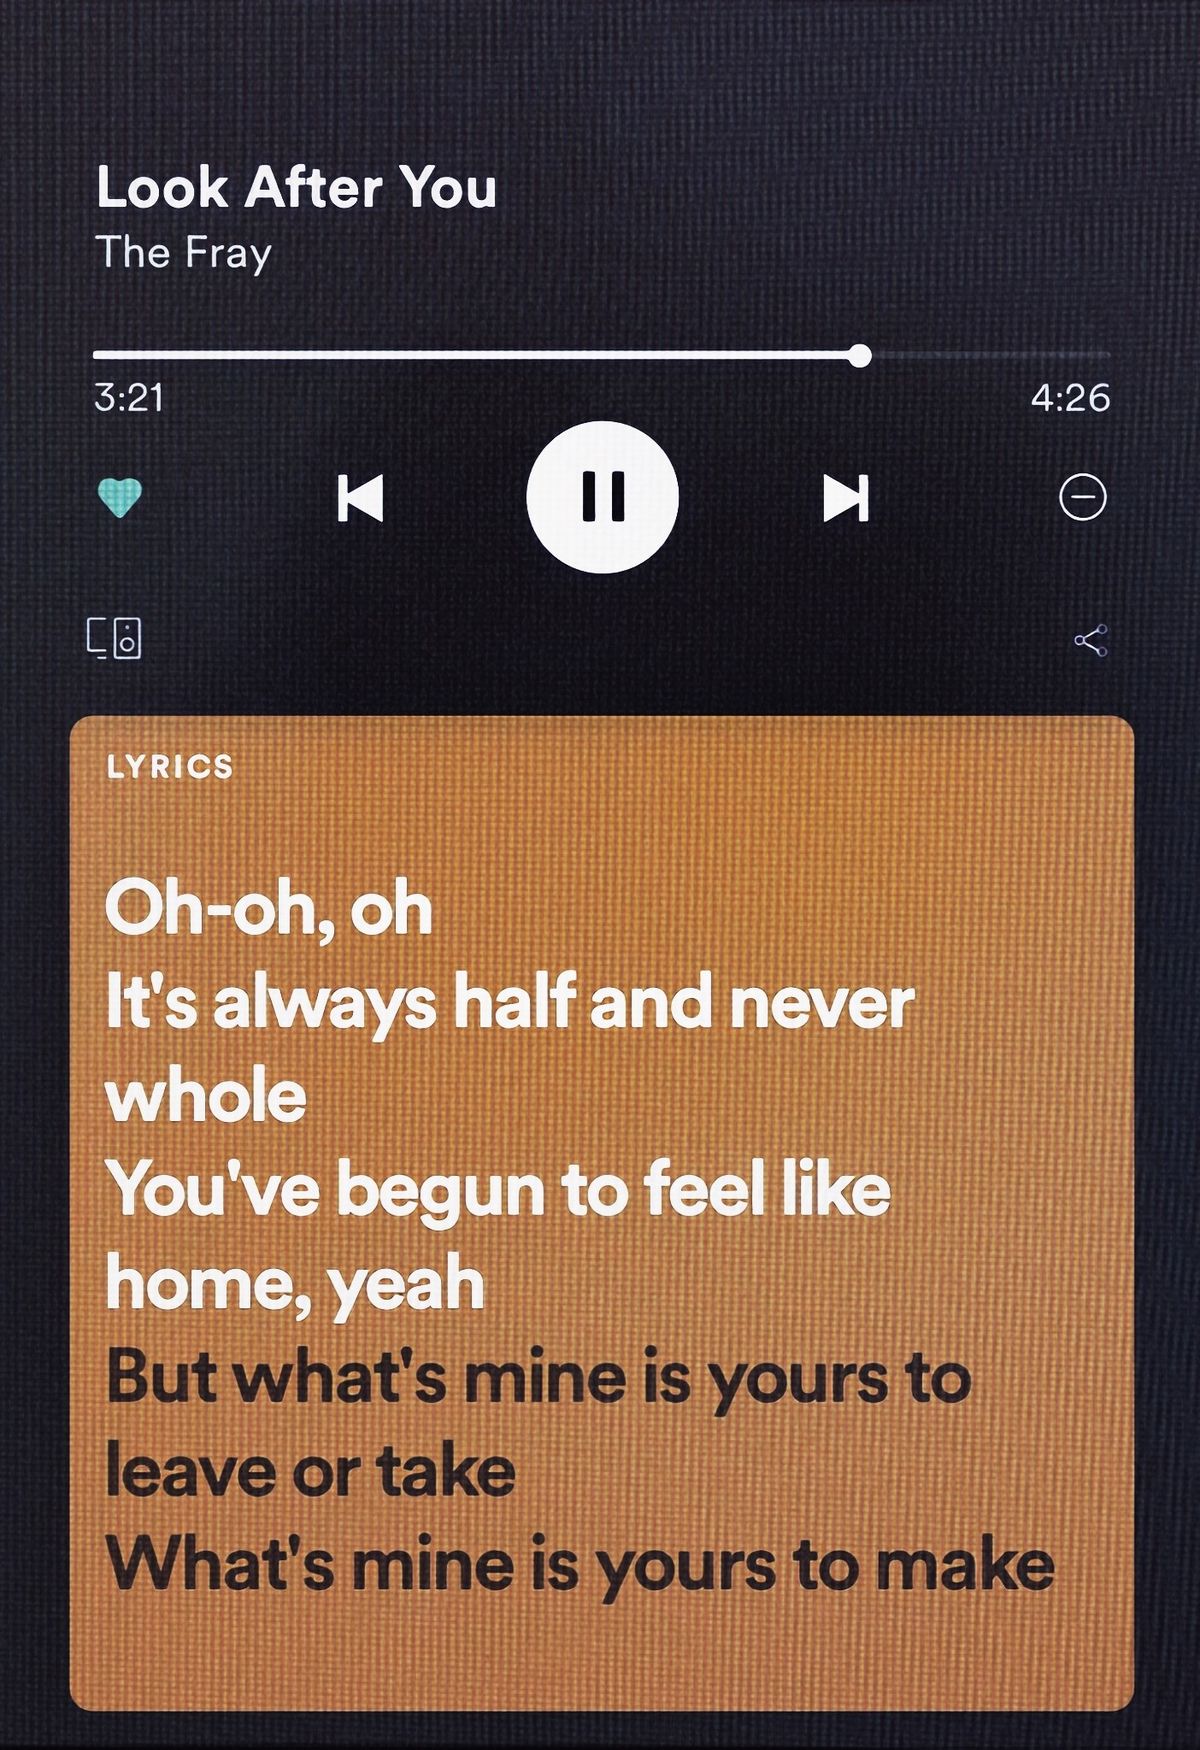 Look After You song lyrics on Spotify